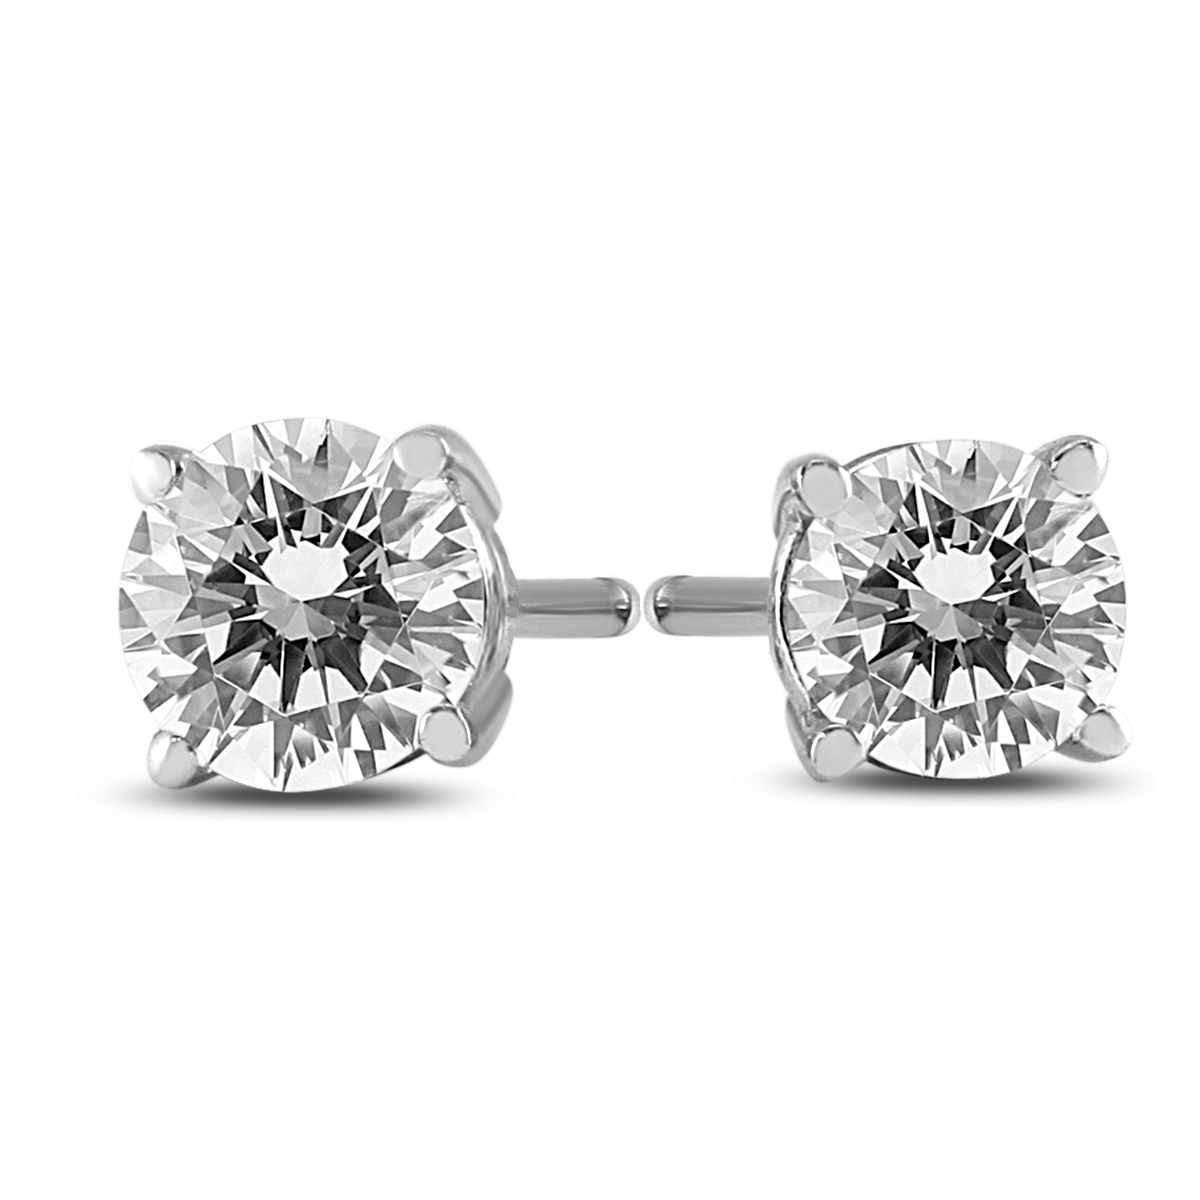 1/4 Carat TW AGS Certified Round Diamond Solitaire Stud Earrings in 14K White Gold (I-J Color, SI1-SI2 Clarity)